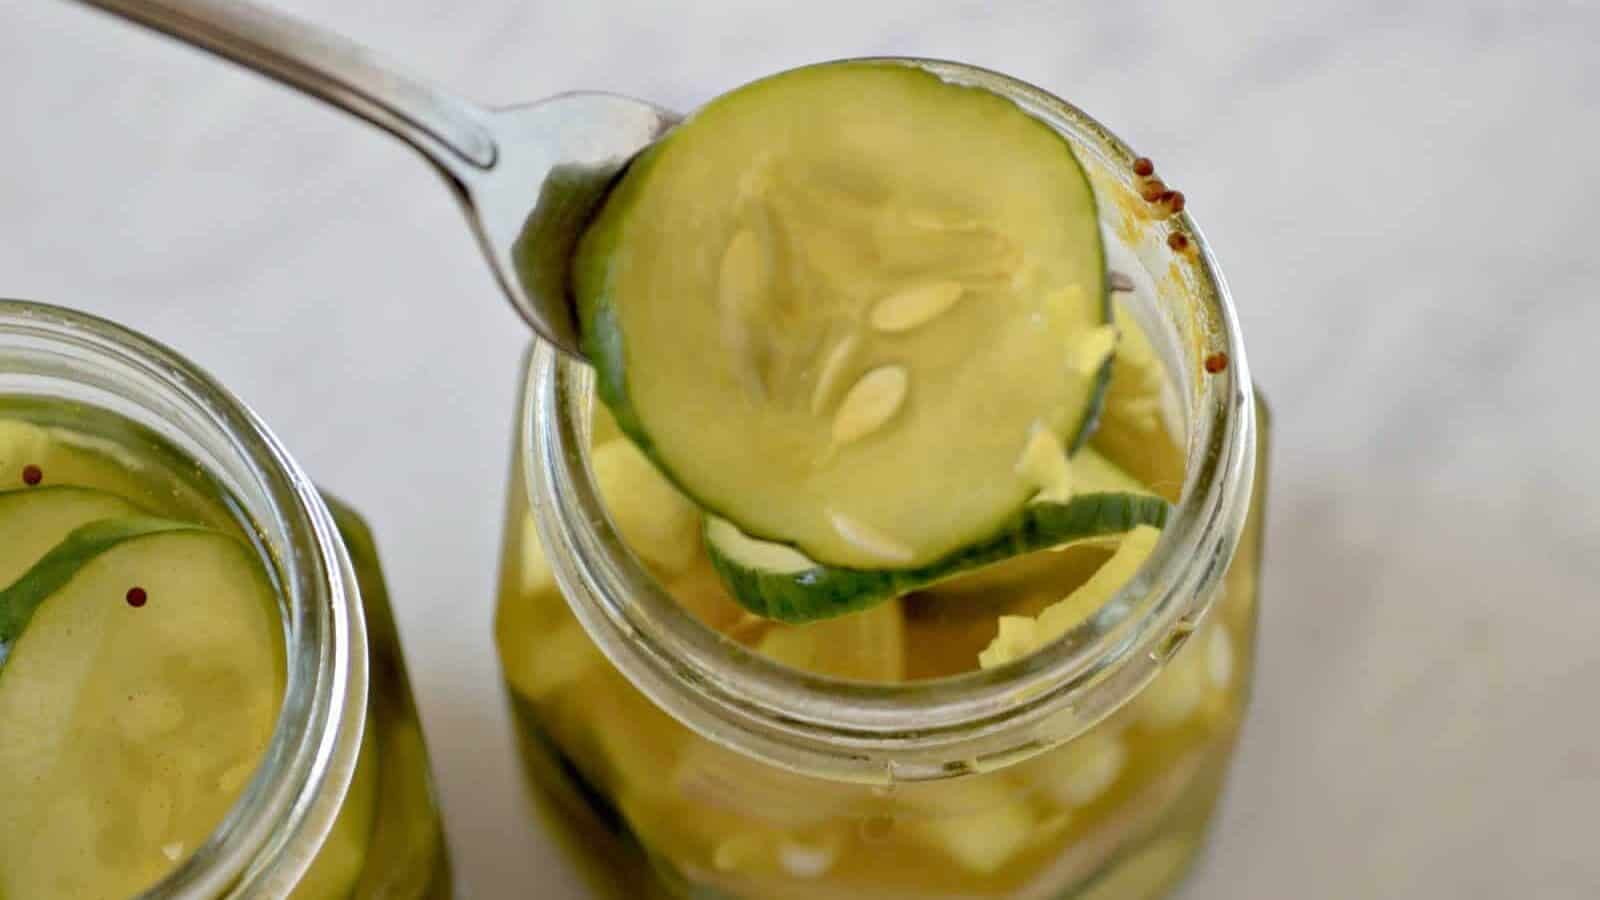 Top view of a jar of bread and butter pickles.